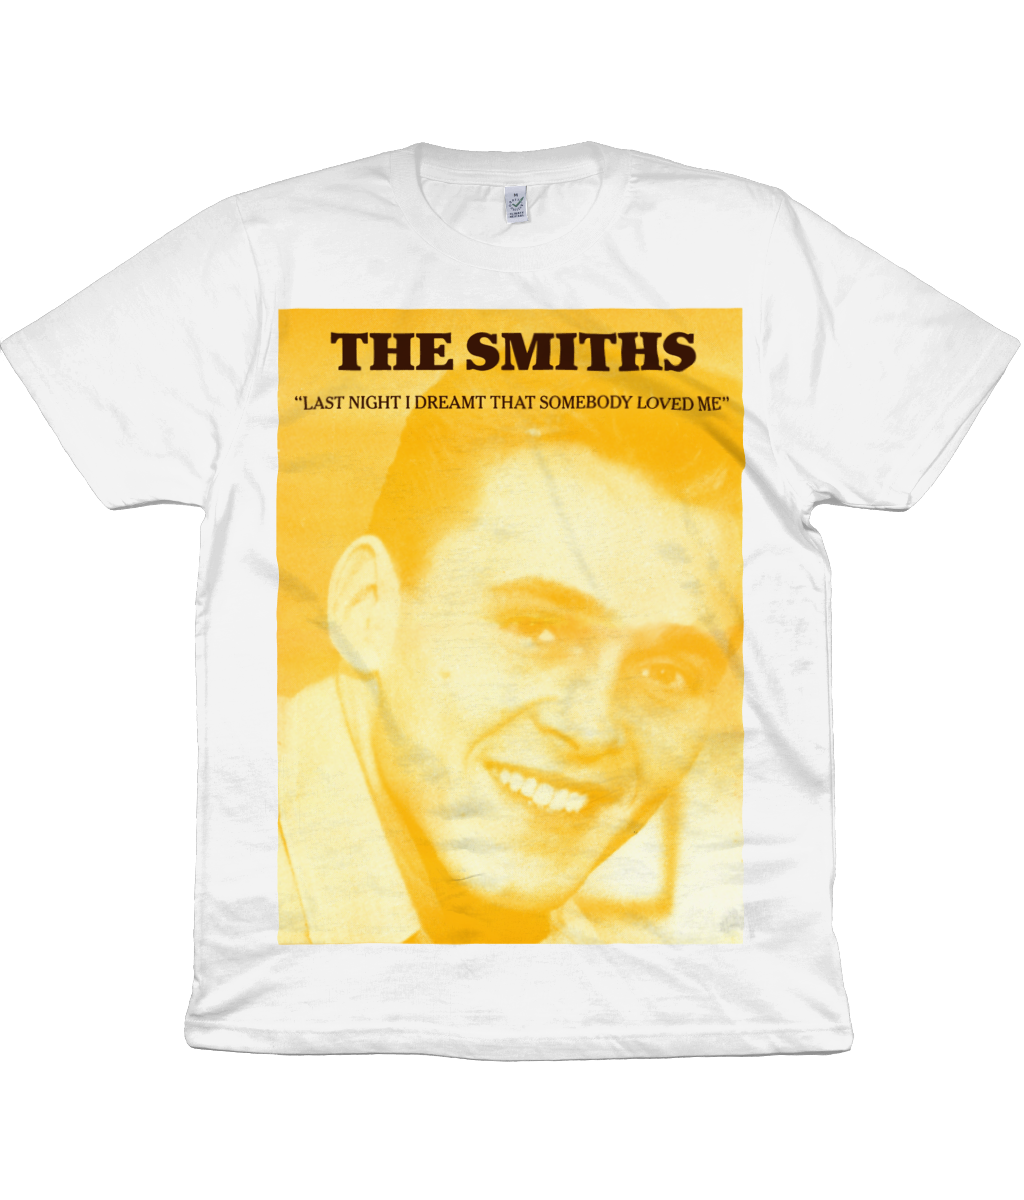 THE SMITHS - LAST NIGHT I DREAMT THAT SOMEBODY LOVED ME - 1987 PROMO